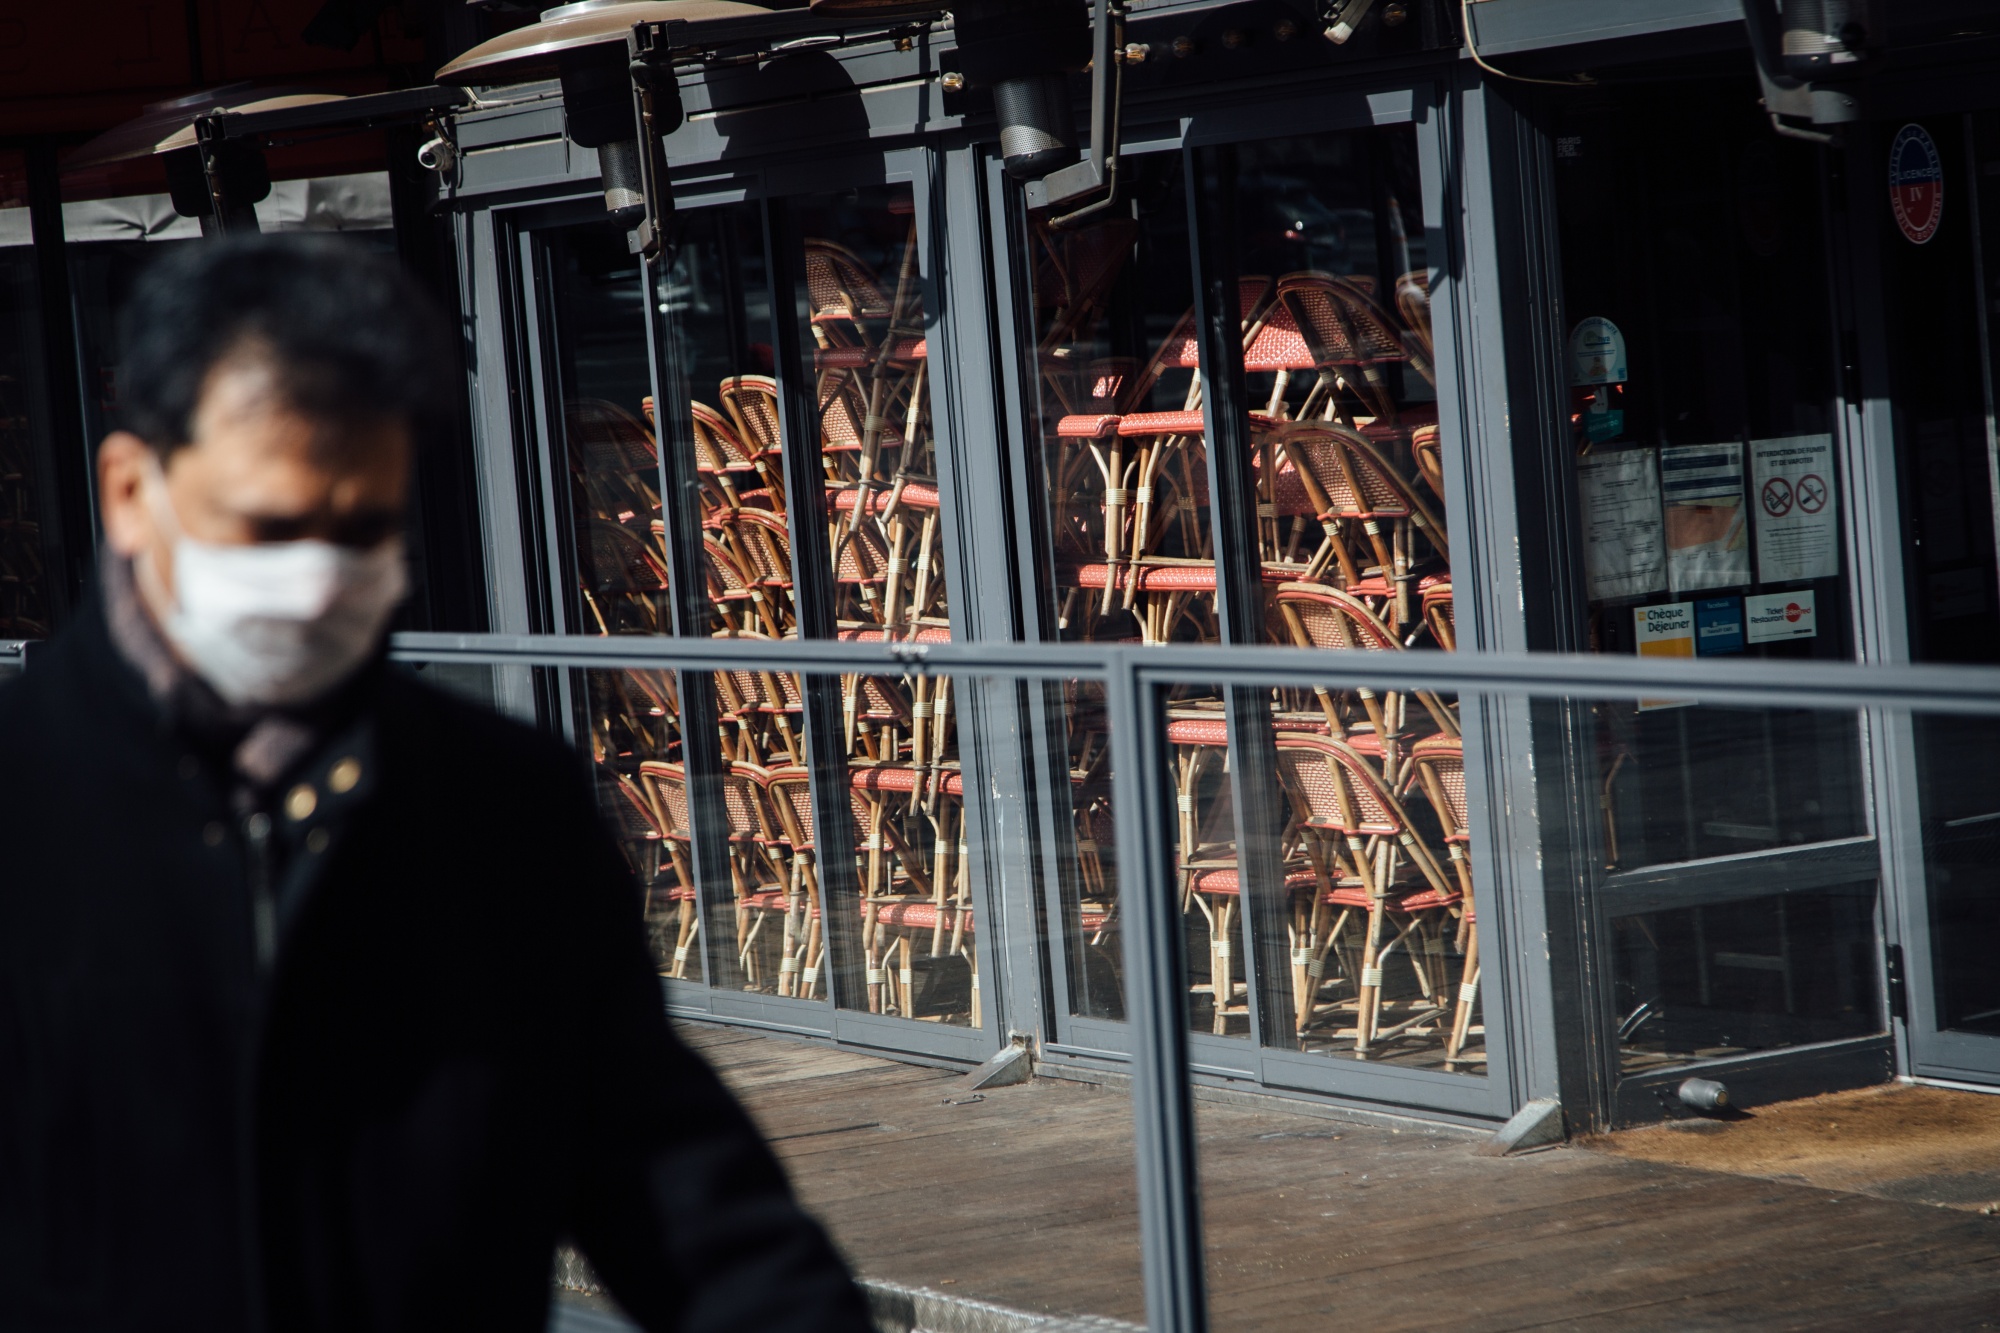 A pedestrian walks past a closed cafe restaurant with chairs stacked inside in Paris.